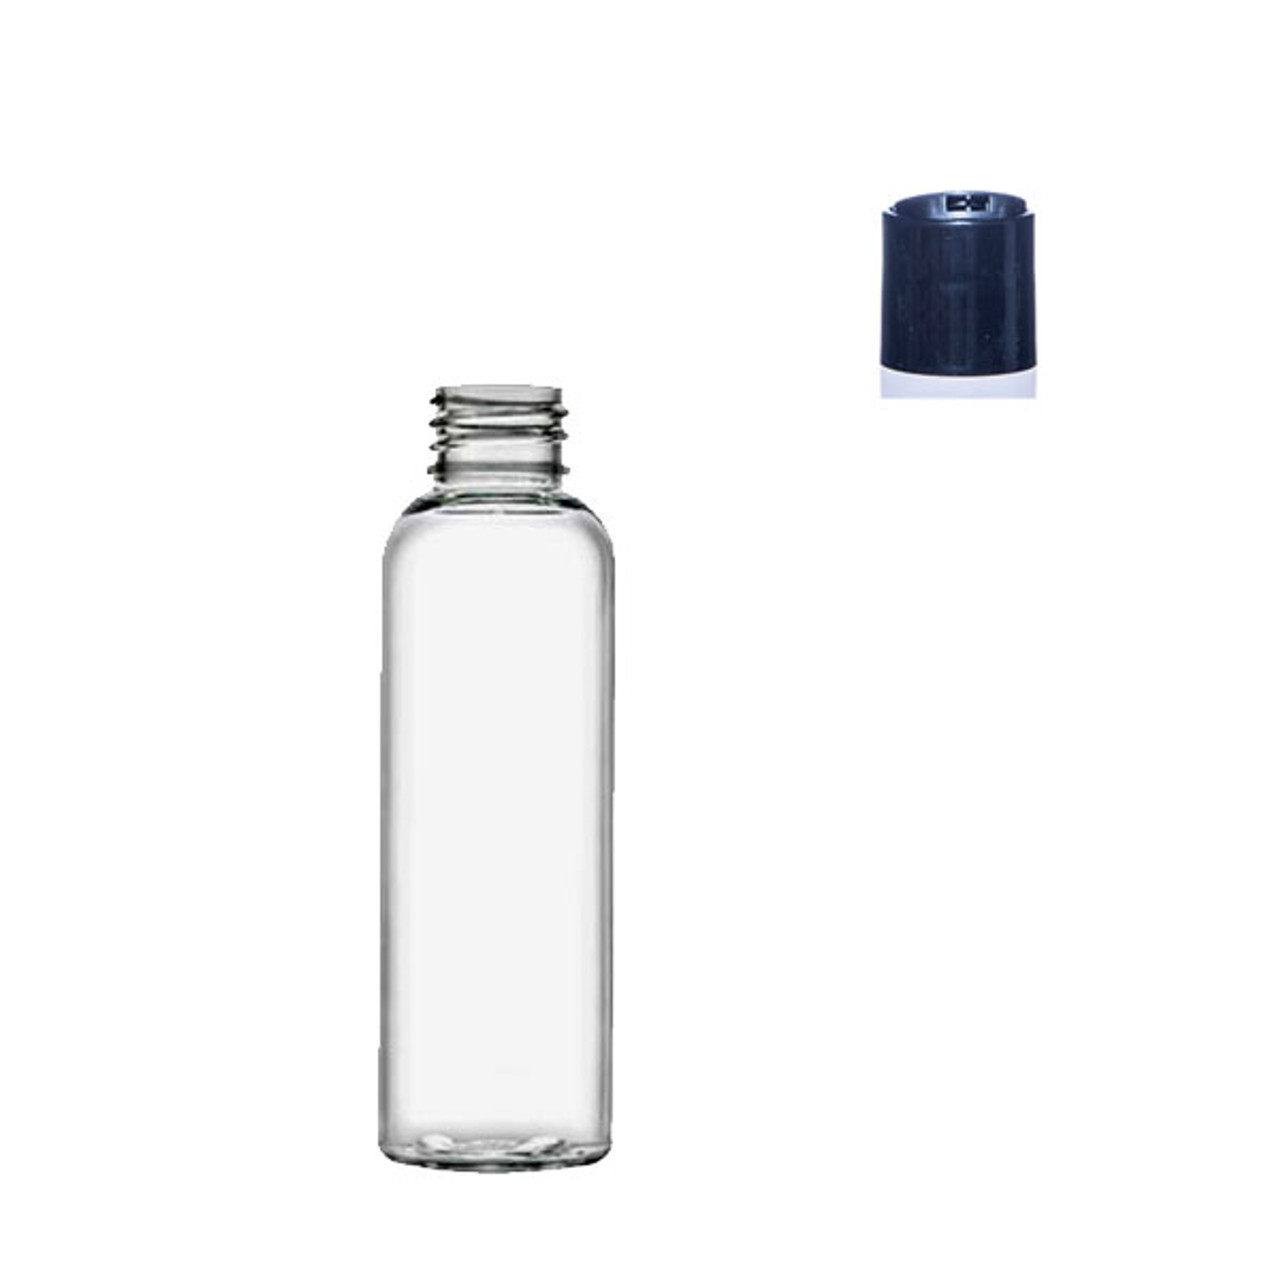 PET Bullet Bottle - Clear - 2 oz. - The Flaming Candle Company